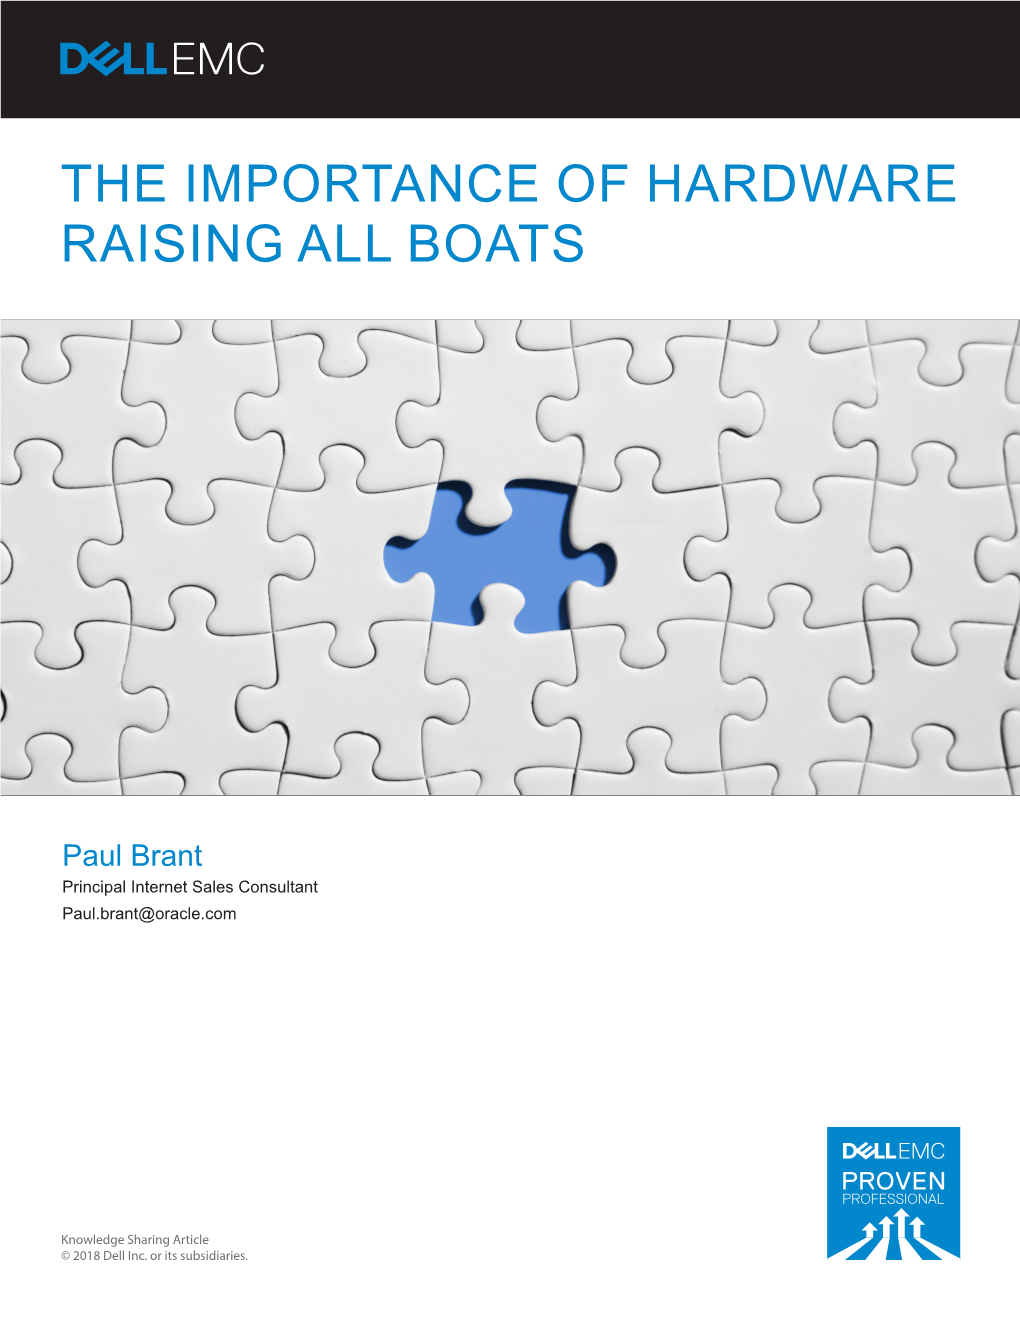 The Importance of Hardware Raising All Boats